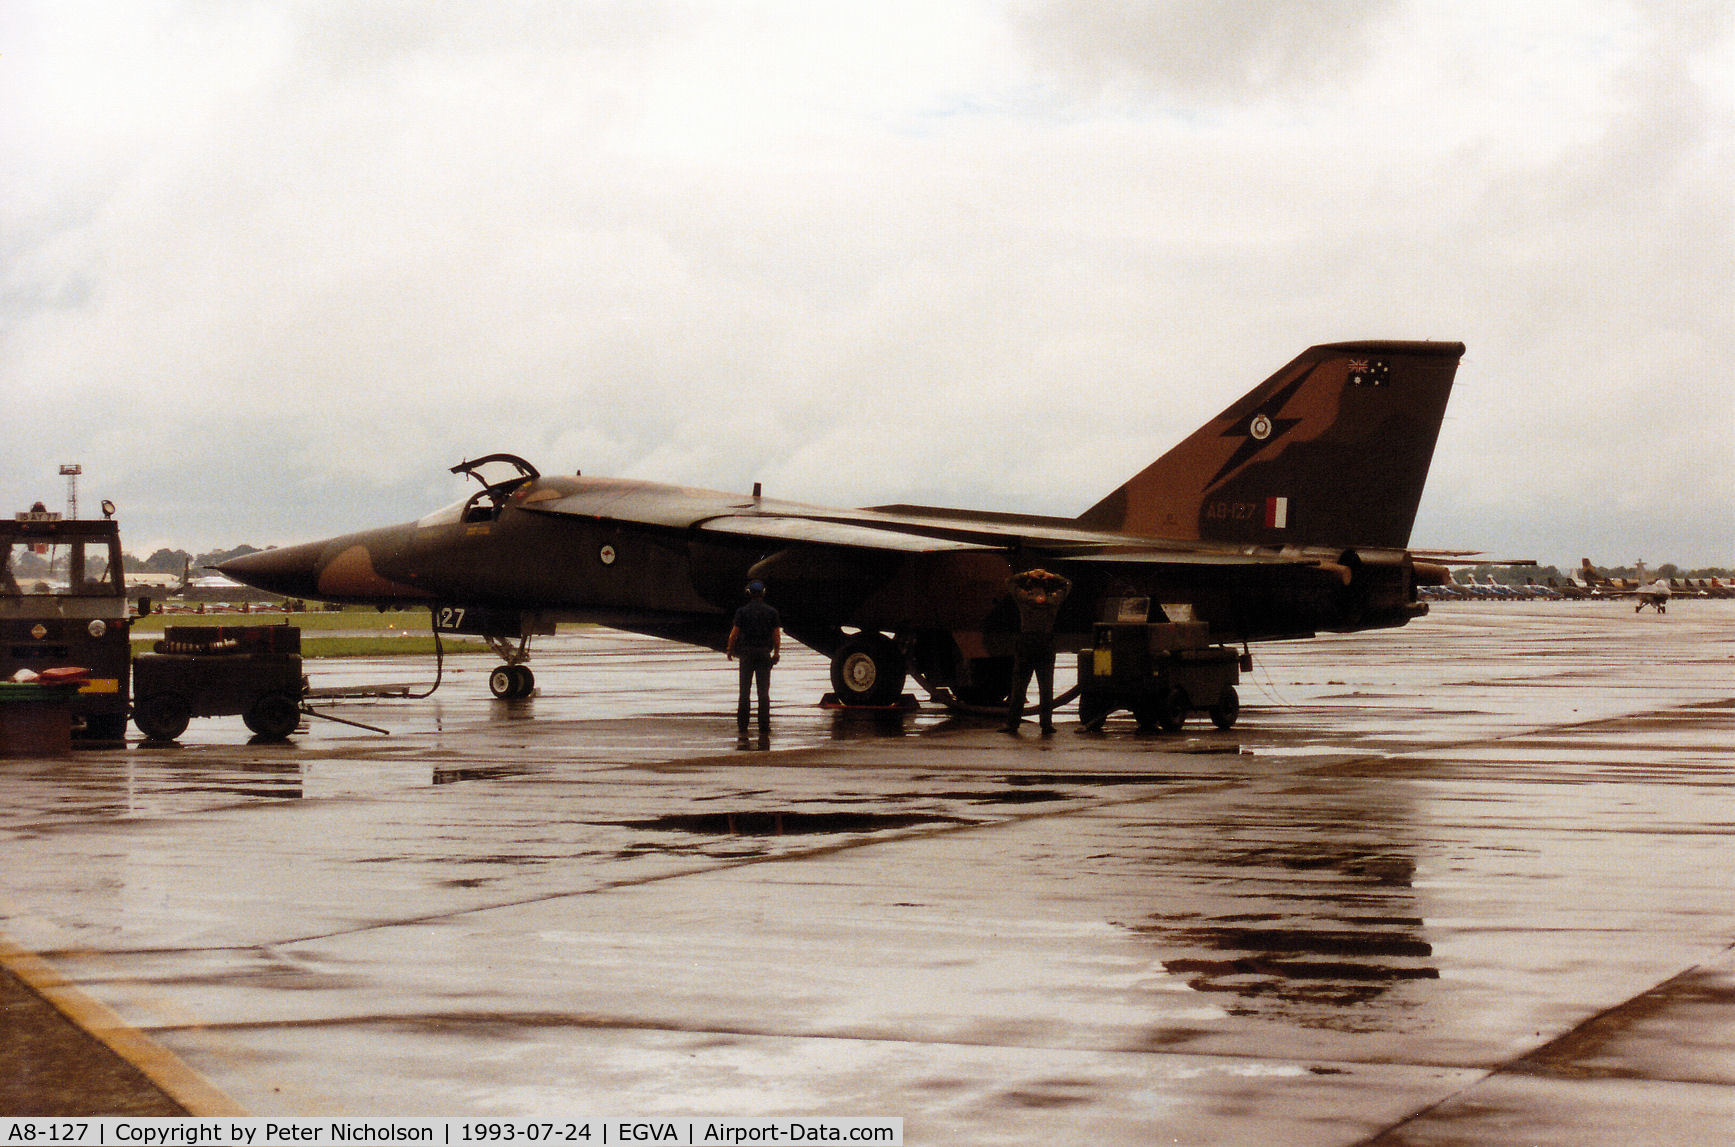 A8-127, 1967 General Dynamics F-111C Aardvark C/N D1-03, Another view of the F-111C of 1 Squadron Royal Australian Air Force on the flight-line at the 1993 Intnl Air Tattoo at RAF Fairford.